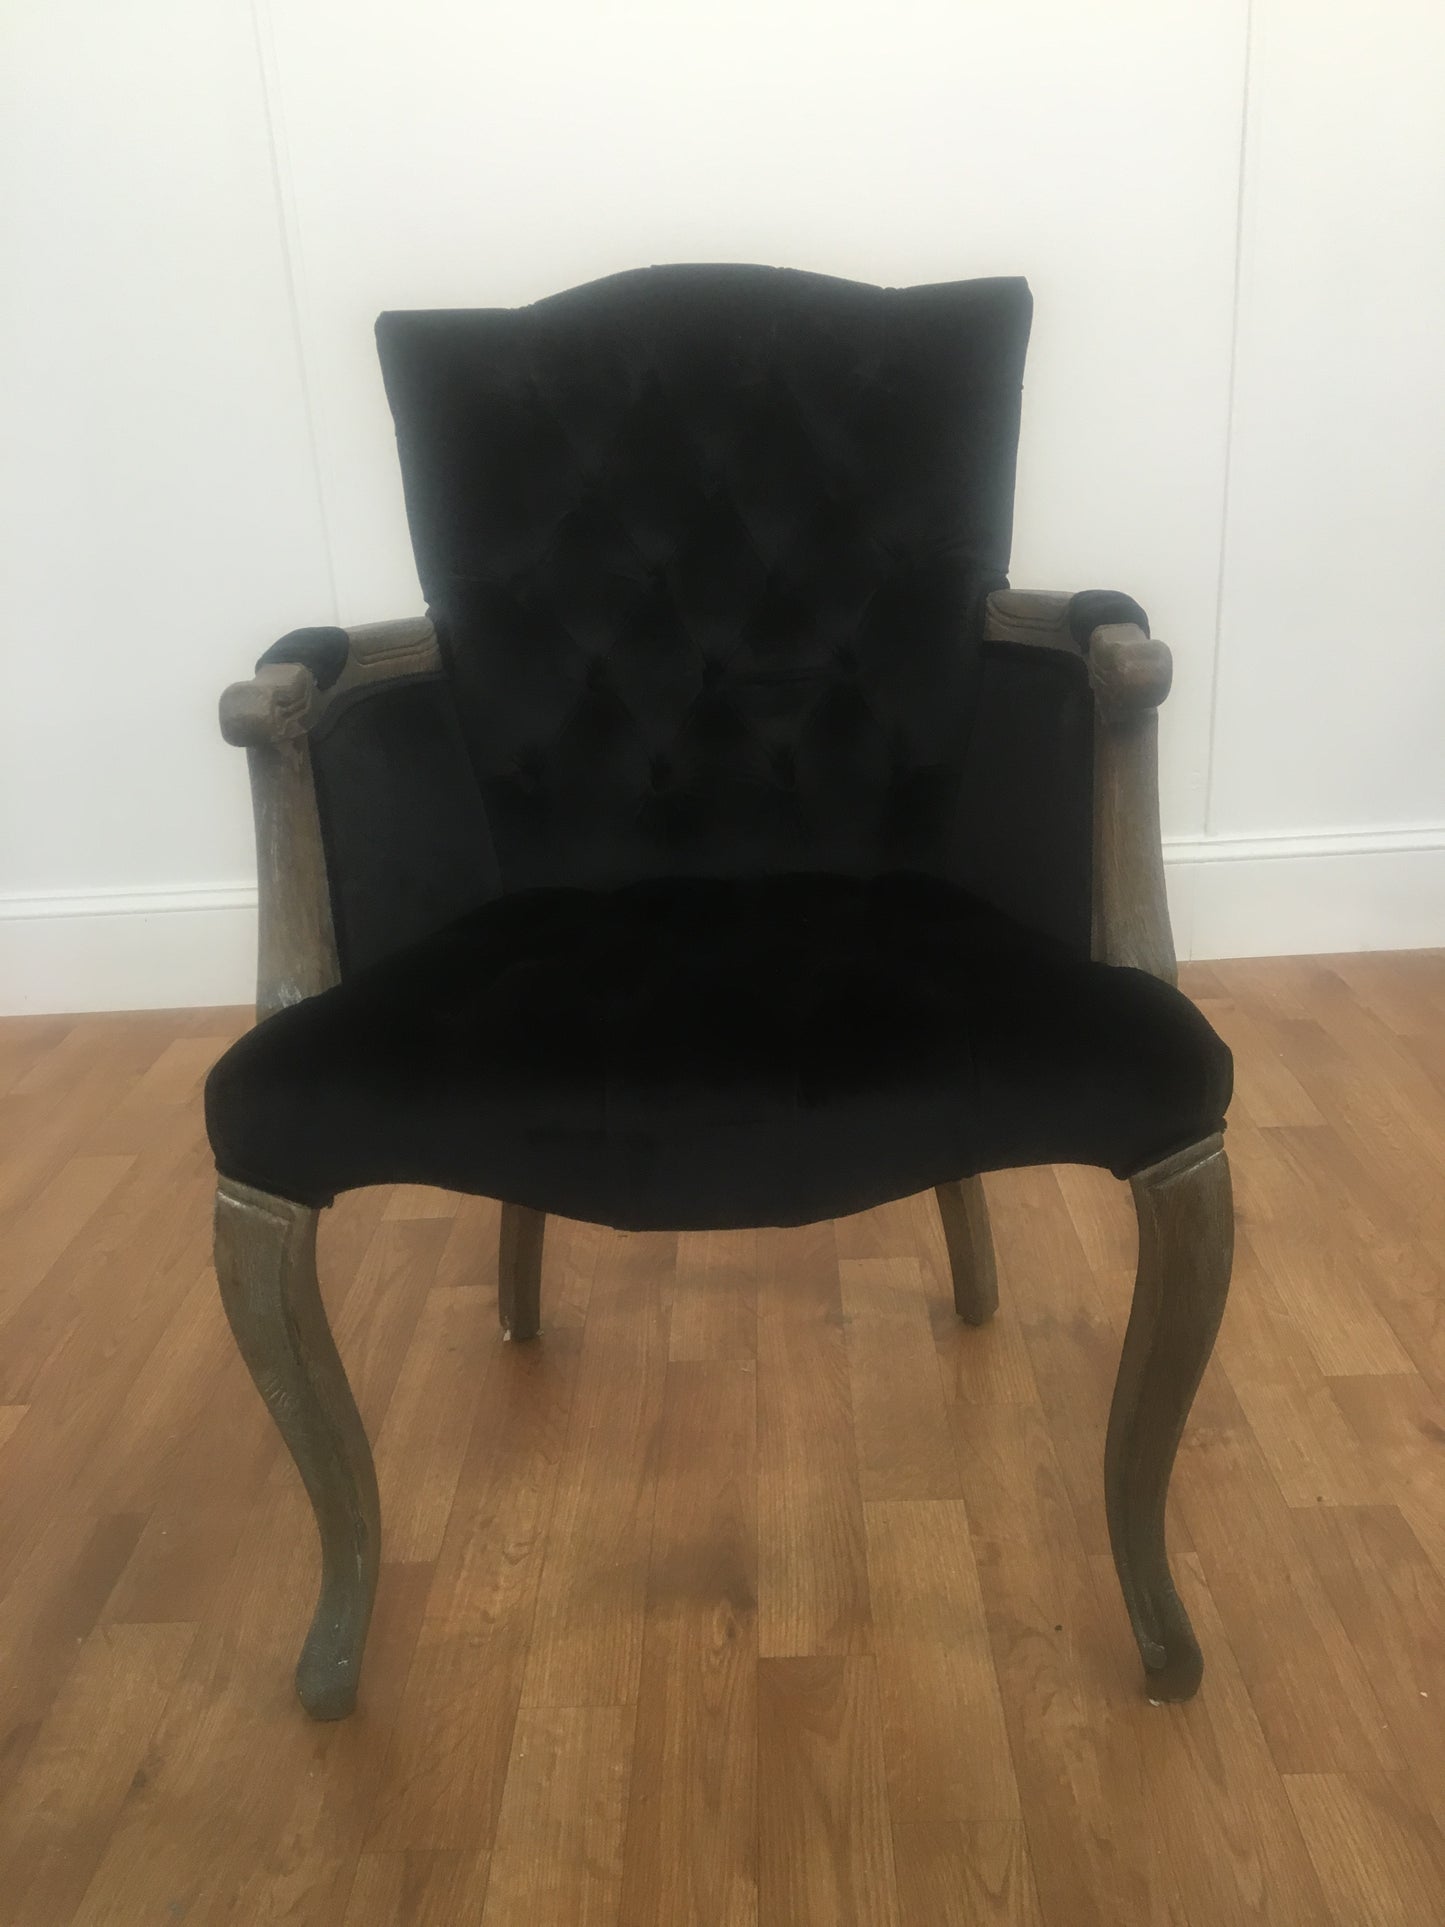 BLACK VELVET ARM CHAIR WITH WOODEN ARMS AND LEGS